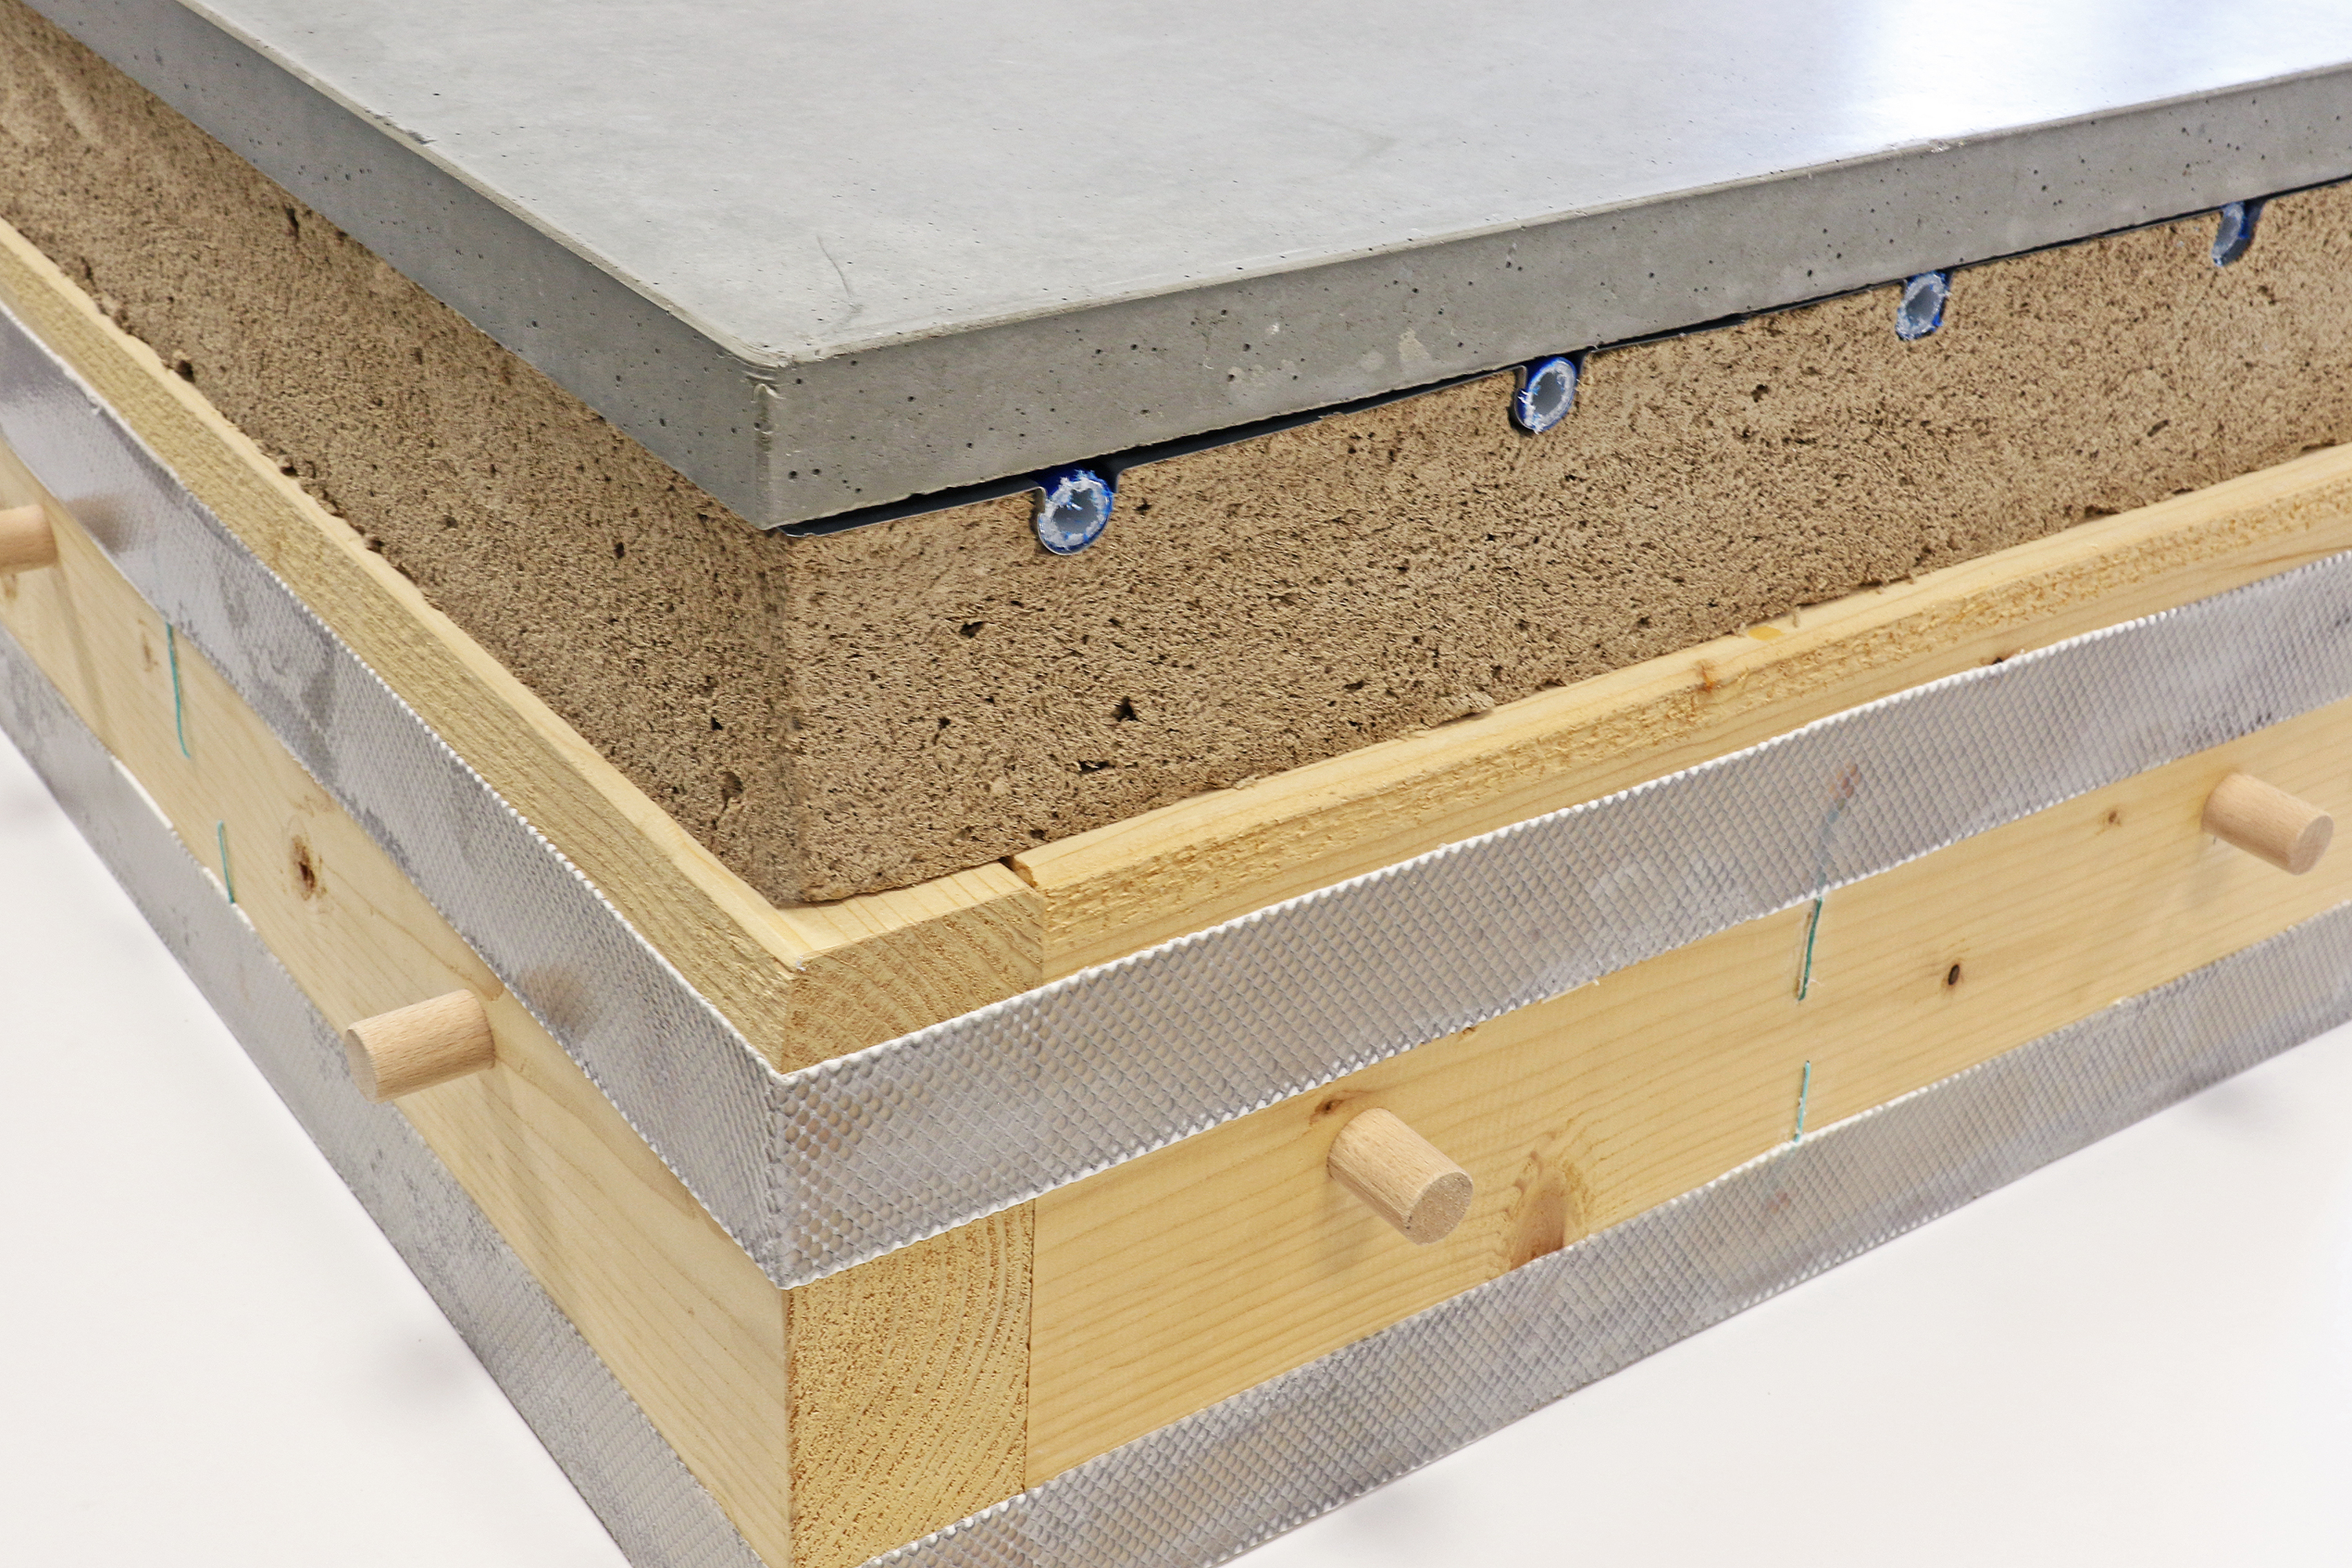 The photo shows a wooden box with a height of around 15 cm. Adhesive tape is attached to the side of the box and round wooden rods protrude as plug connections. On top of the box sits a 10 cm-high wood-foam board covered by a 4 cm-thick layer of concrete. Directly under the concrete layer, pipes are embedded in the wood foam.